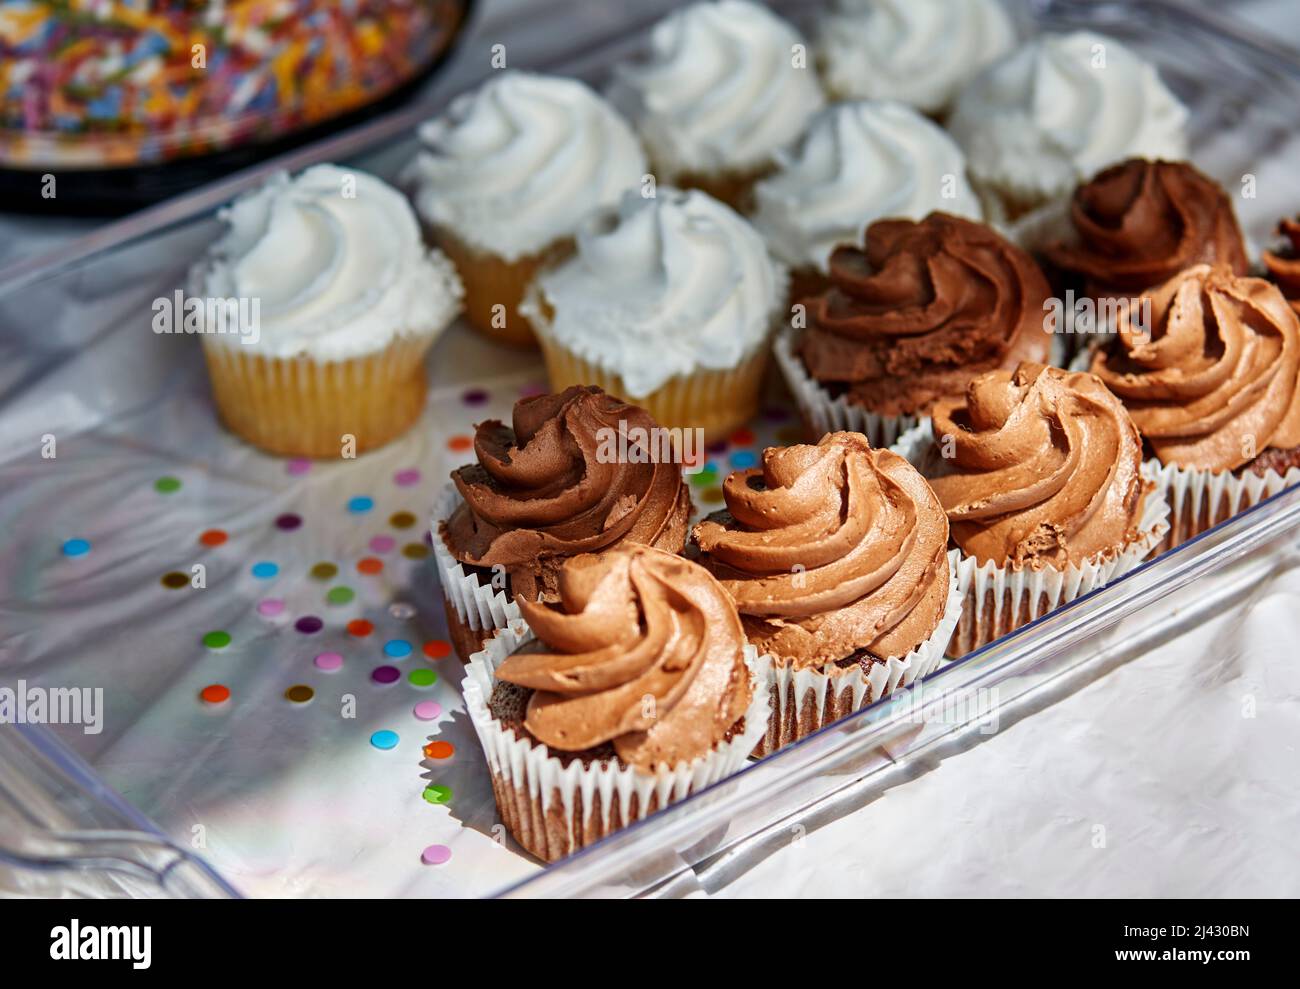 Homemade Chocolate and Vanilla cupcakes with shallow depth of field Stock Photo